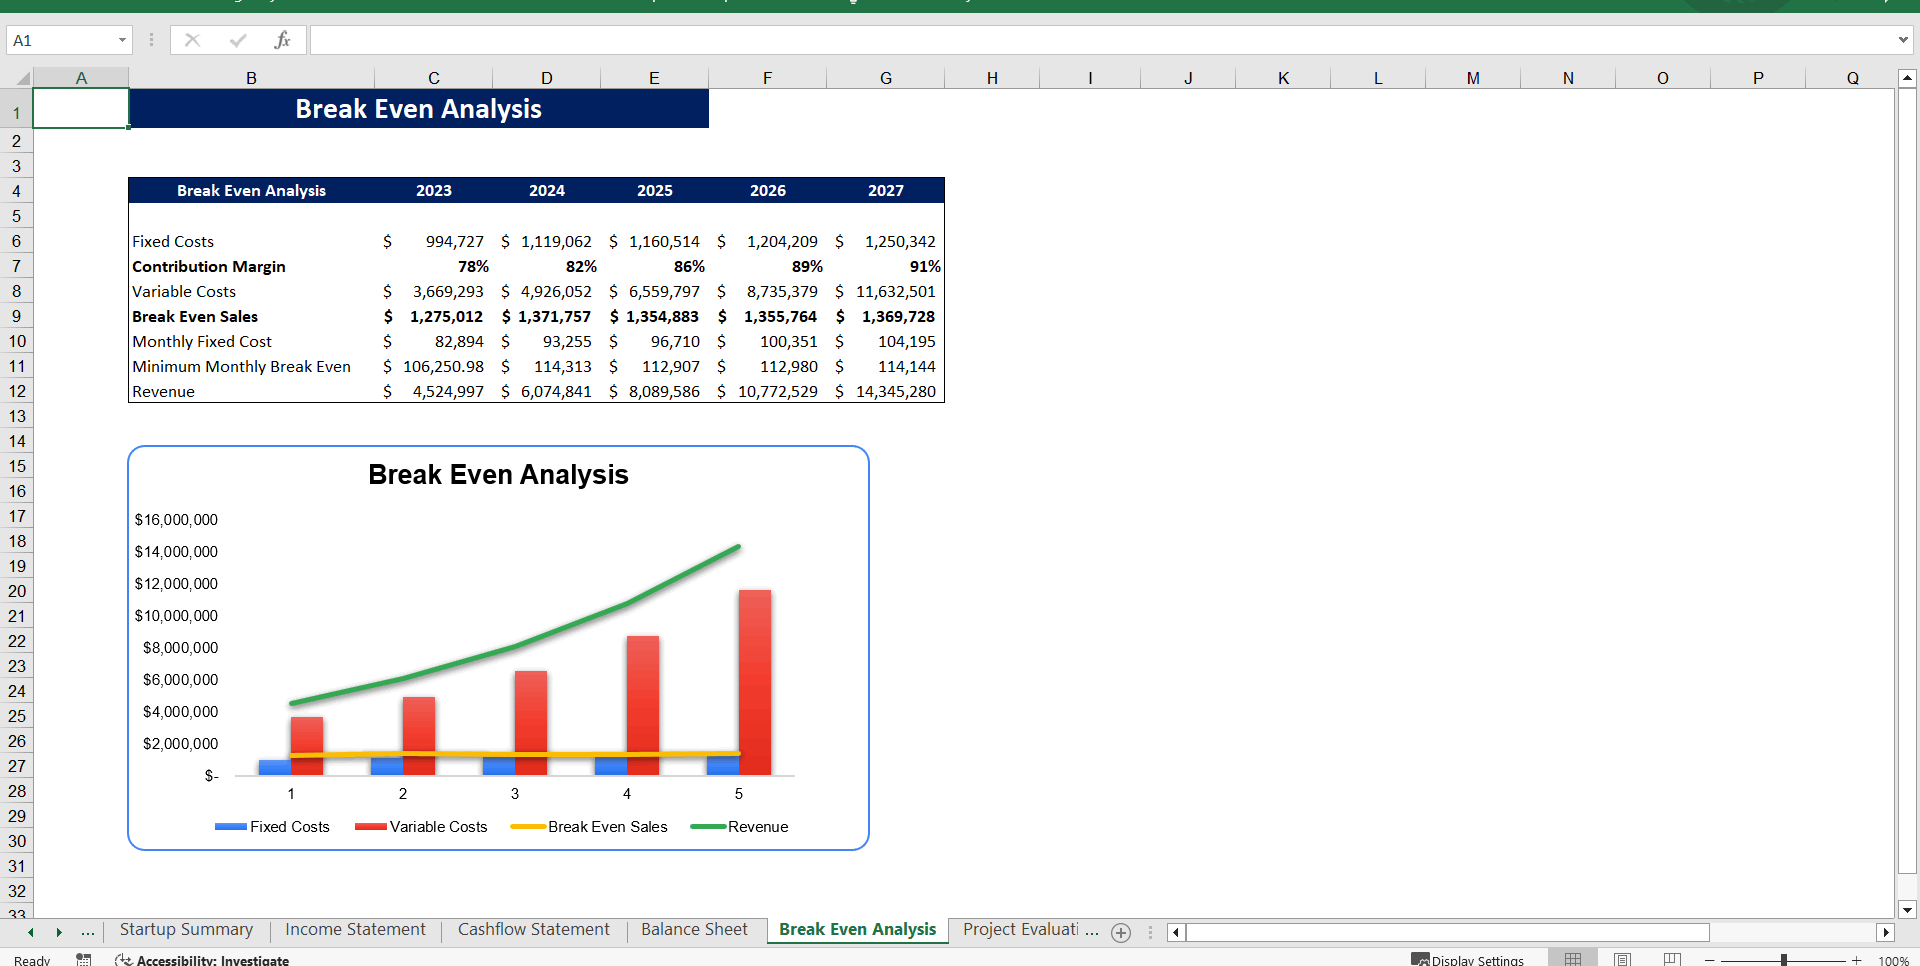 Rental Equipment Excel Financial Model (Excel template (XLSX)) Preview Image